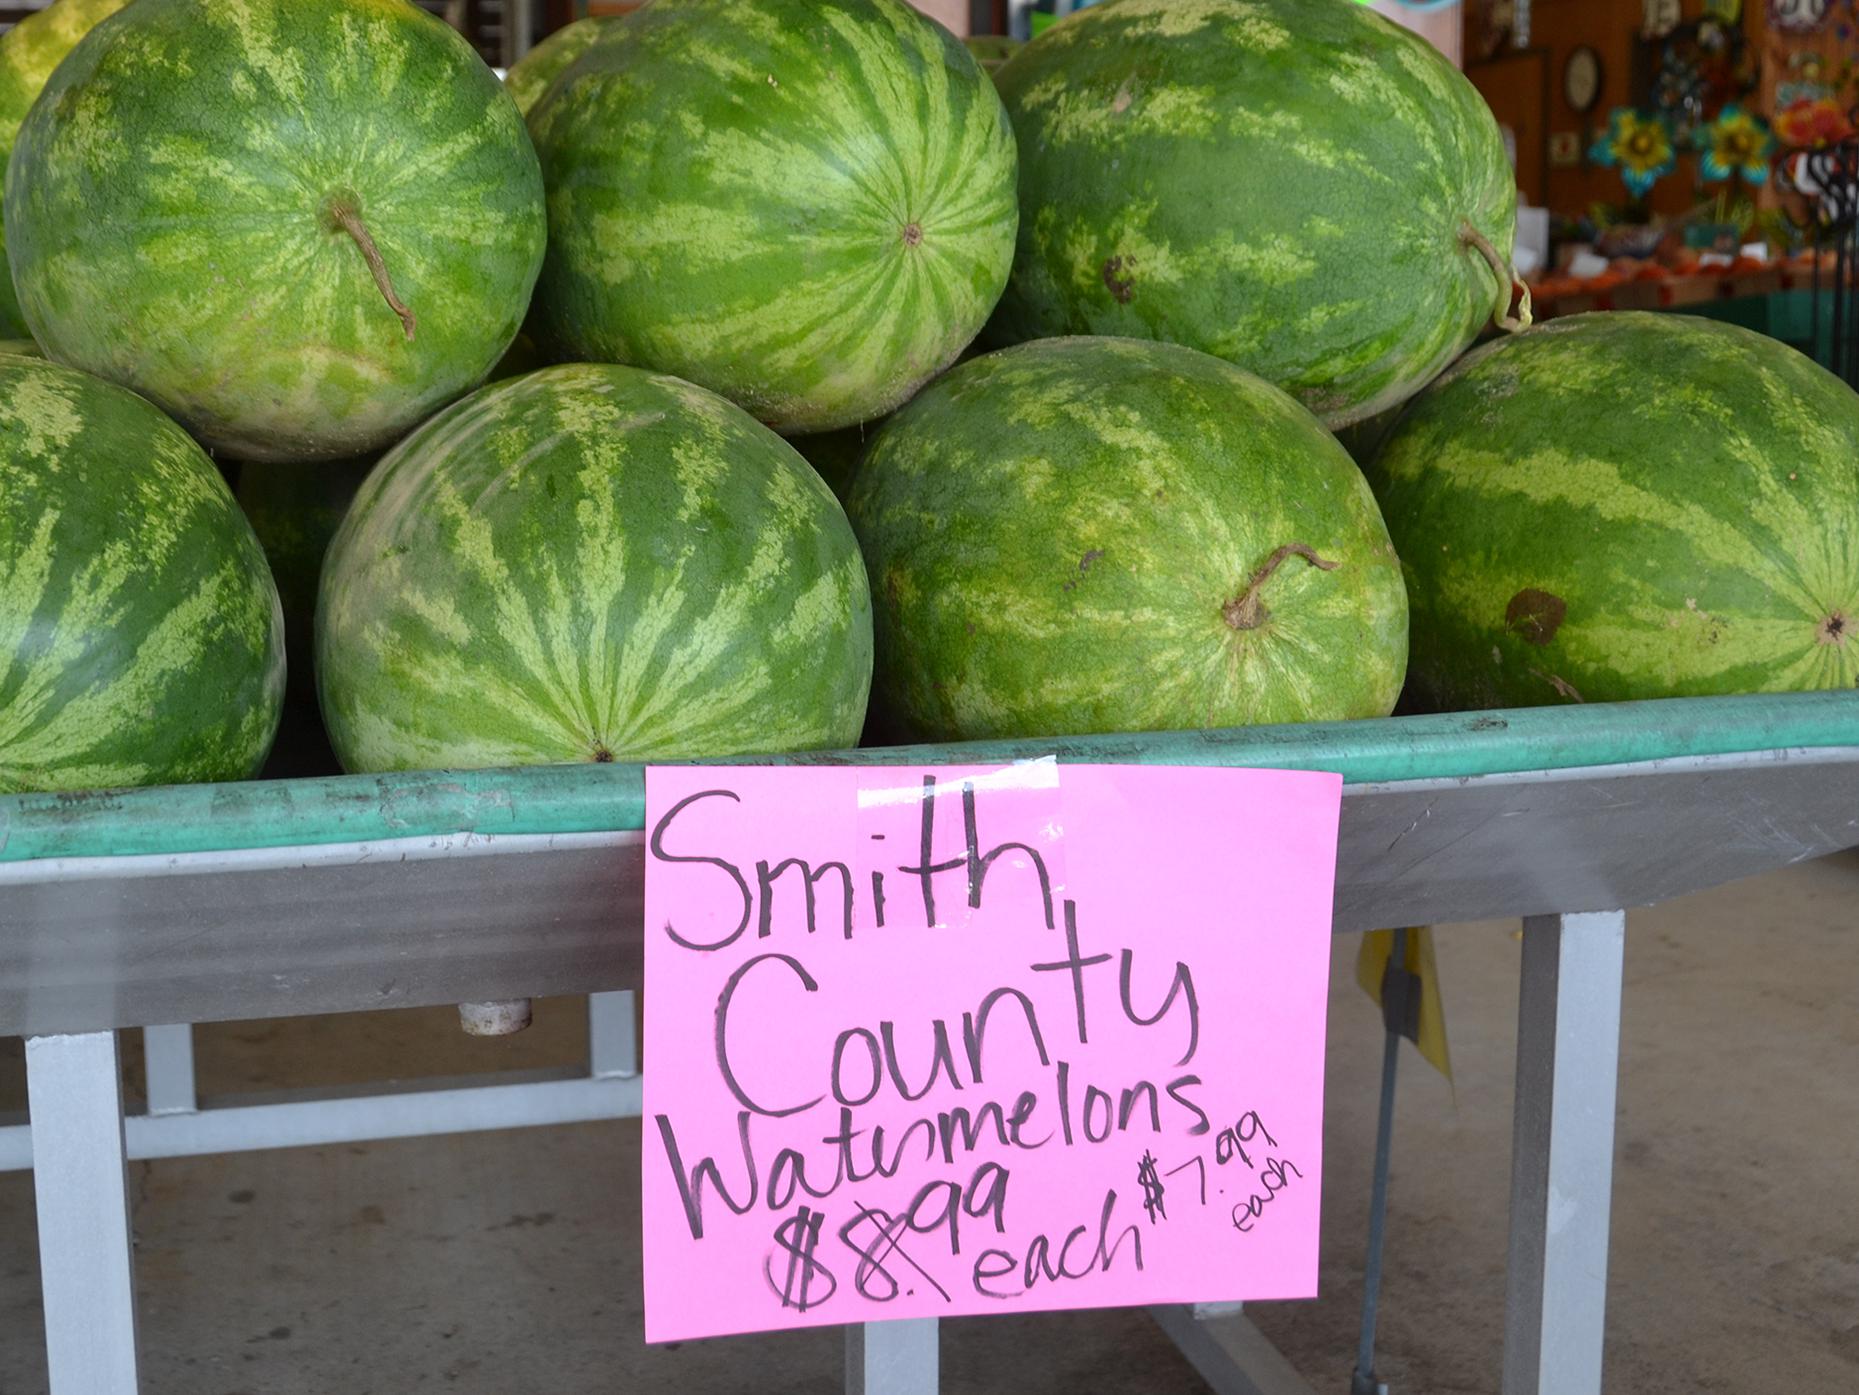 Consumers can find Mississippi-grown watermelons for their summer celebrations at stores and markets across the state, including these at the Byram Farmers Market in Byram, Mississippi, on June 27, 2017. (Photo by MSU Extension Service/Susan Collins-Smith)